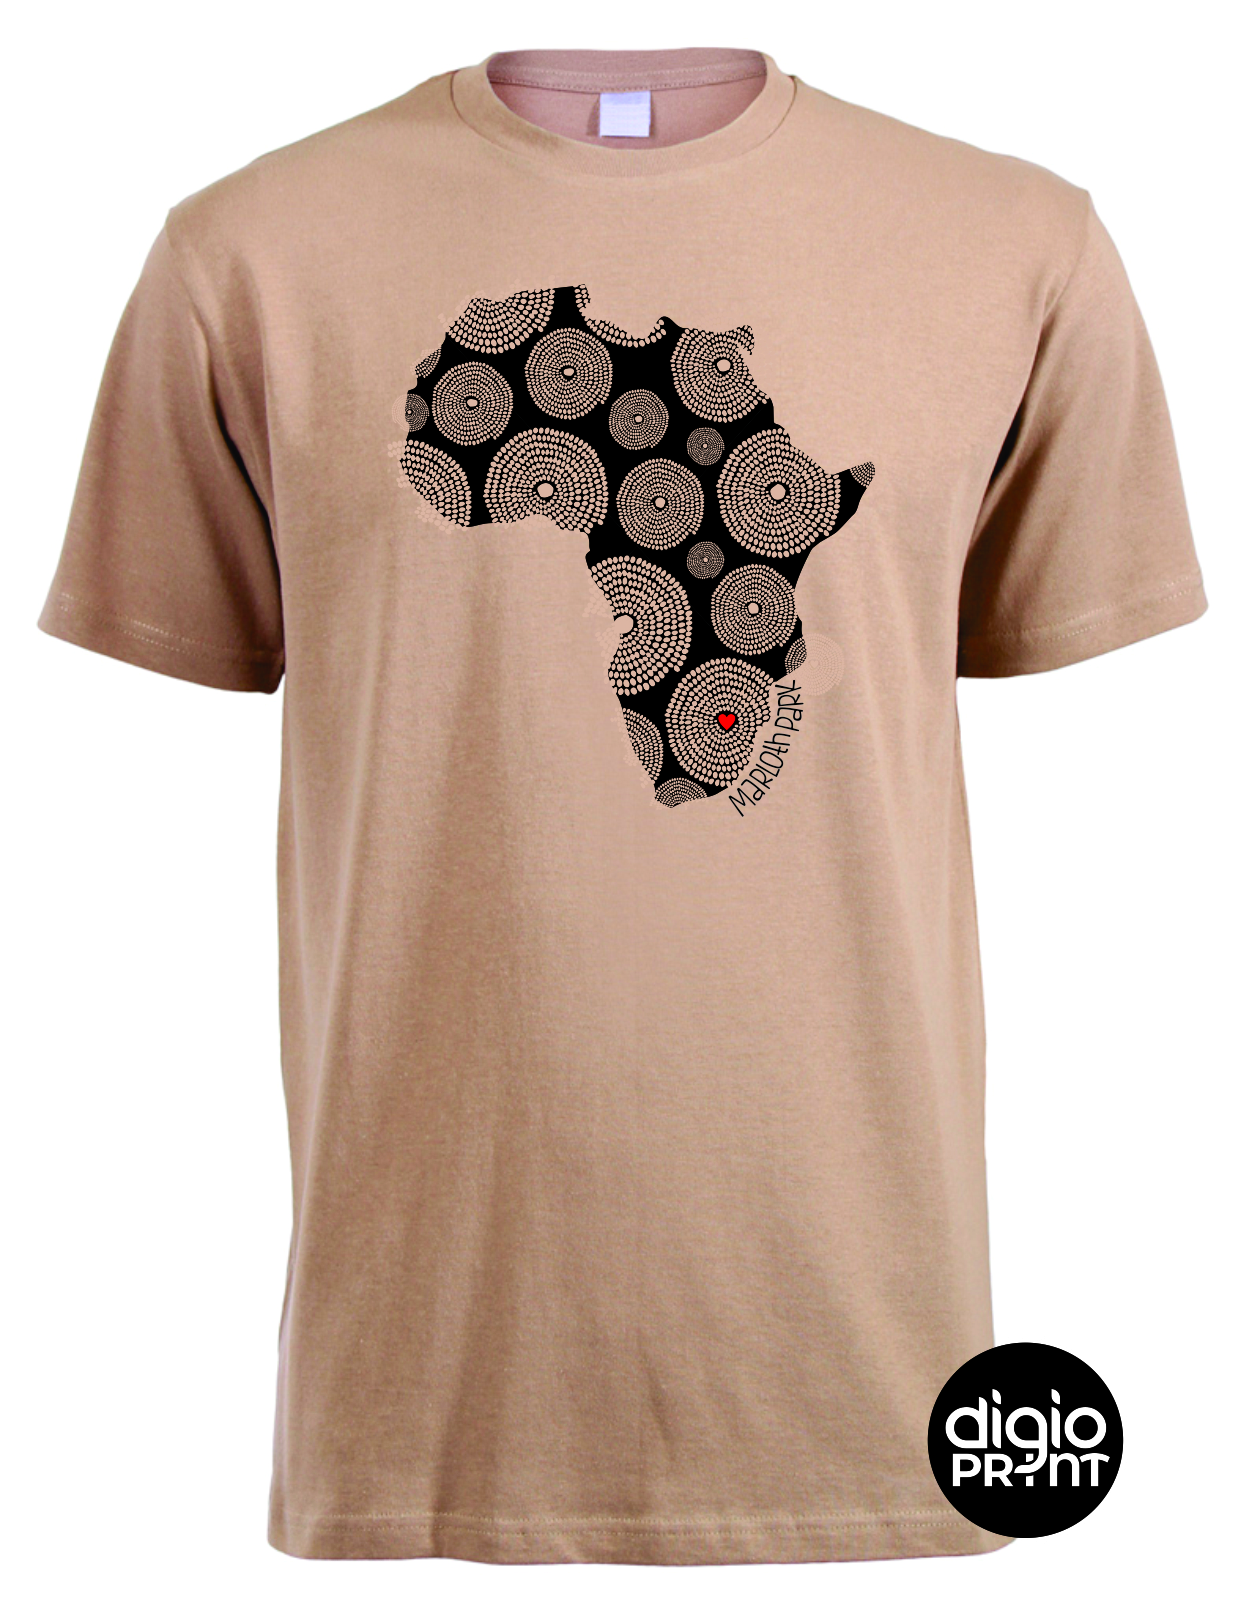 Marloth Park Continent Red Heart Stone T-Shirt